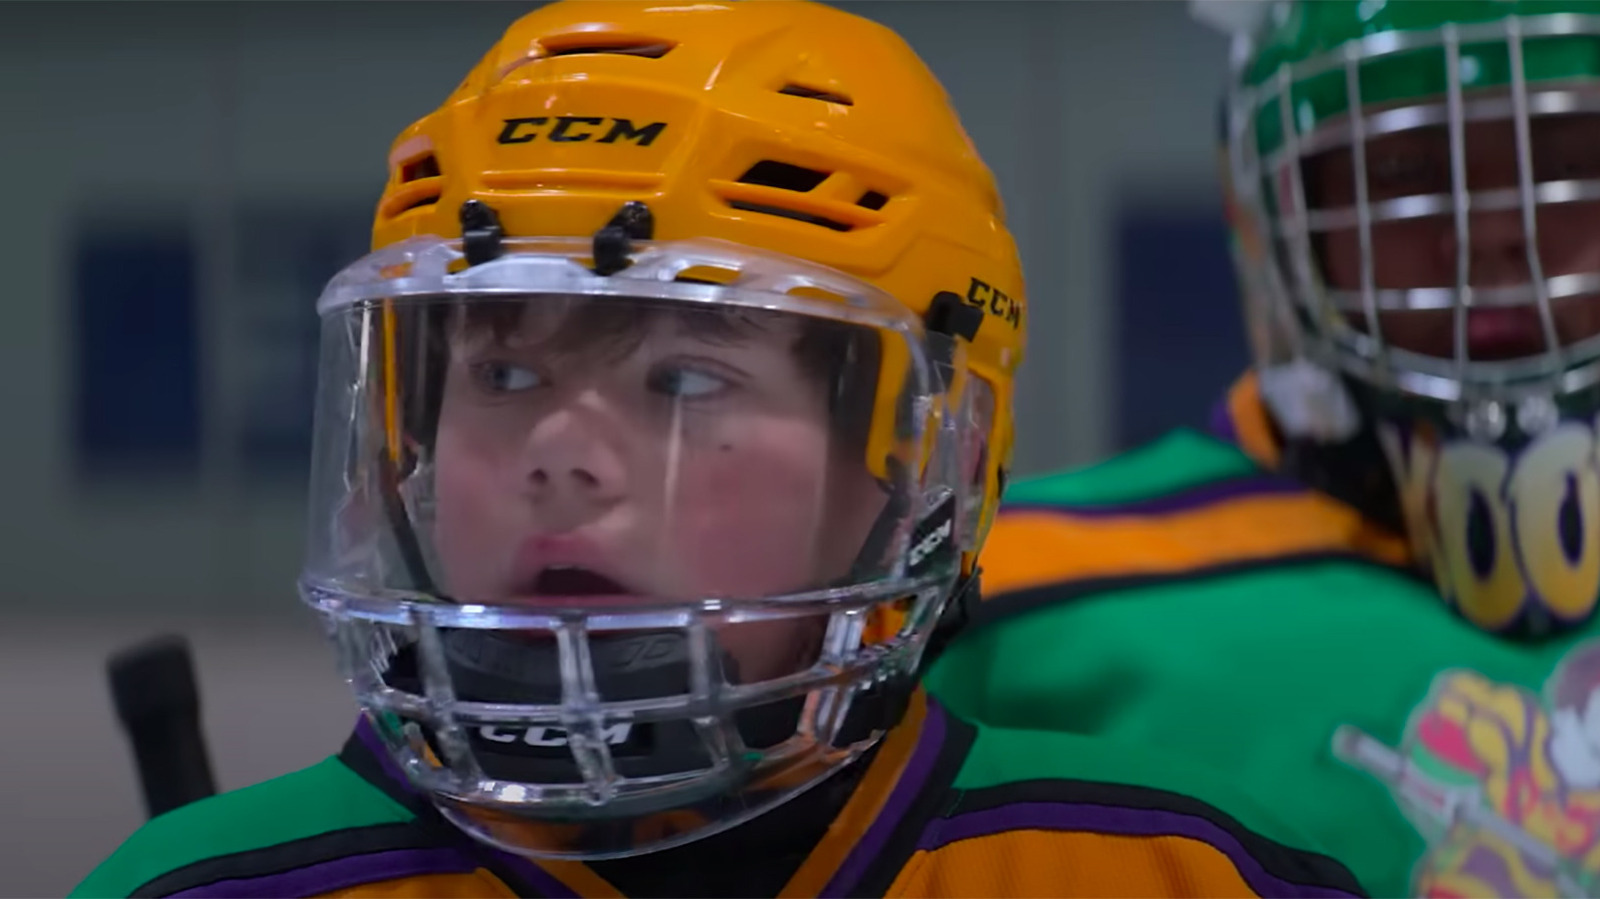 The Mighty Ducks: Game Changers Season 2 - What We Know So Far